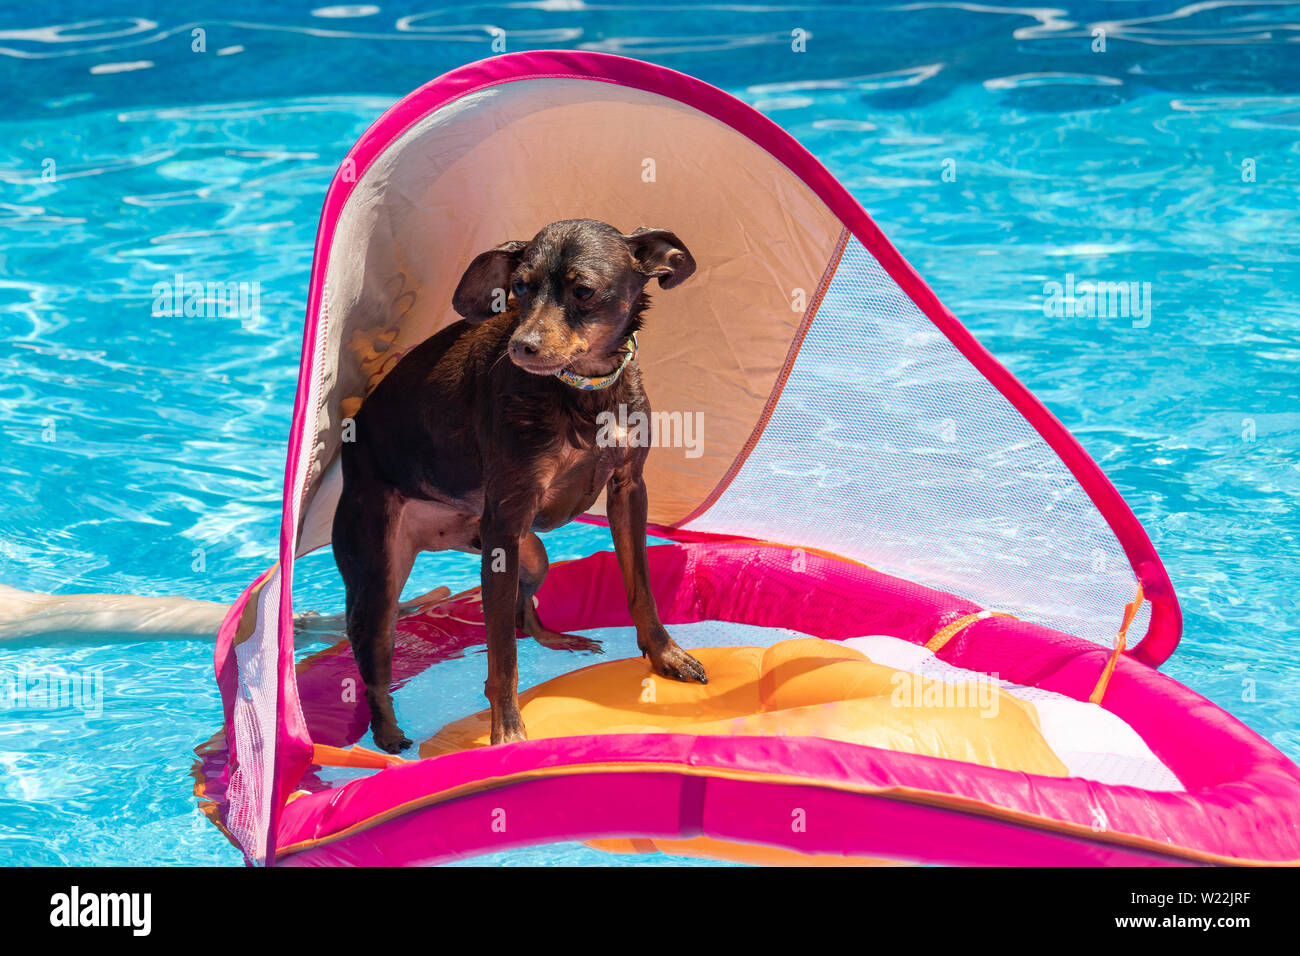 miniature pinscher dog floating in the swimming pool on a toddler flotation device Stock Photo